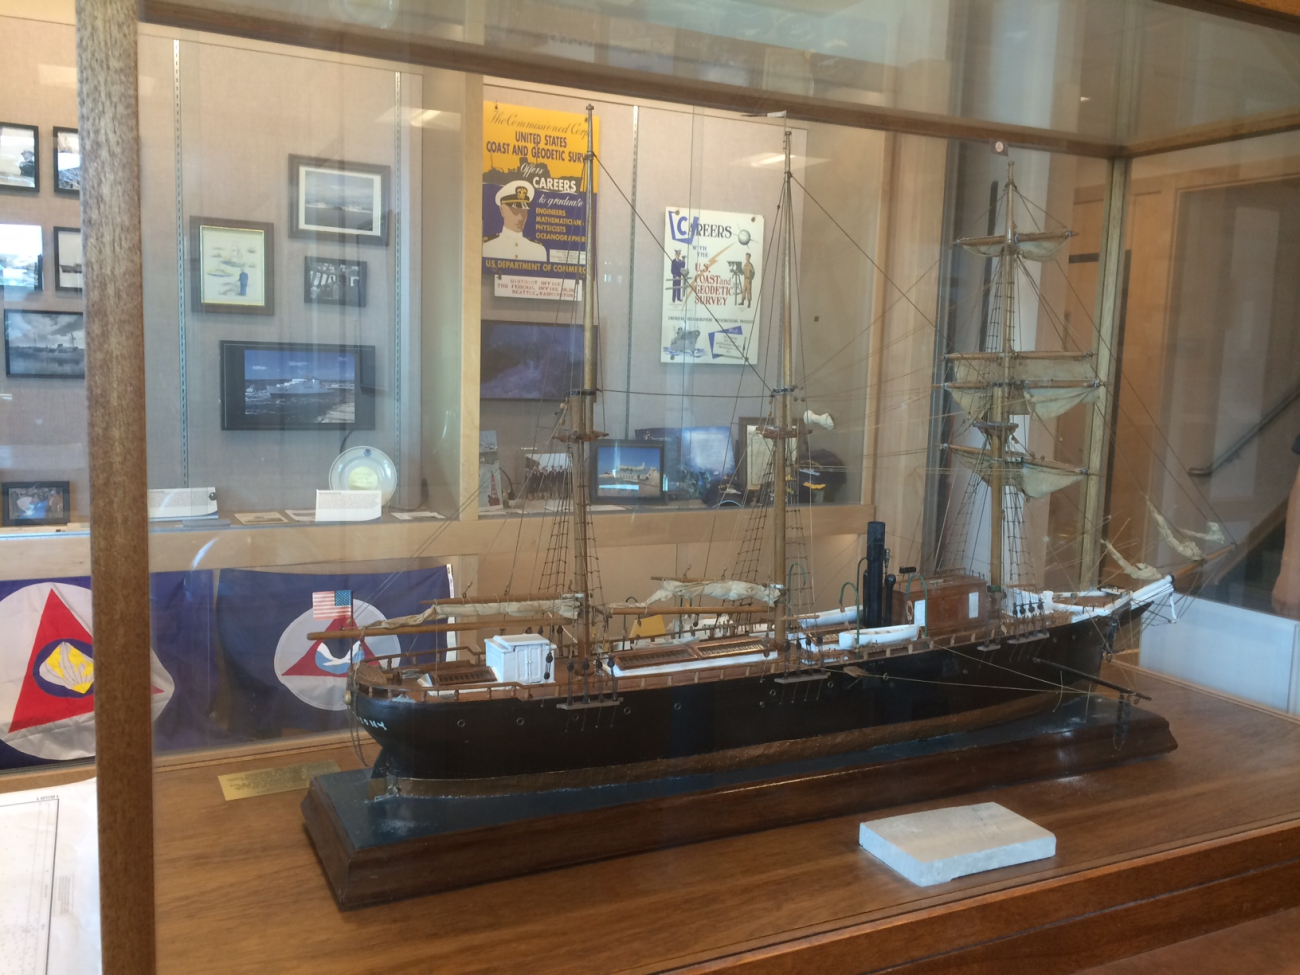 Model of Coast and Geodetic Survey Ship PATTERSON